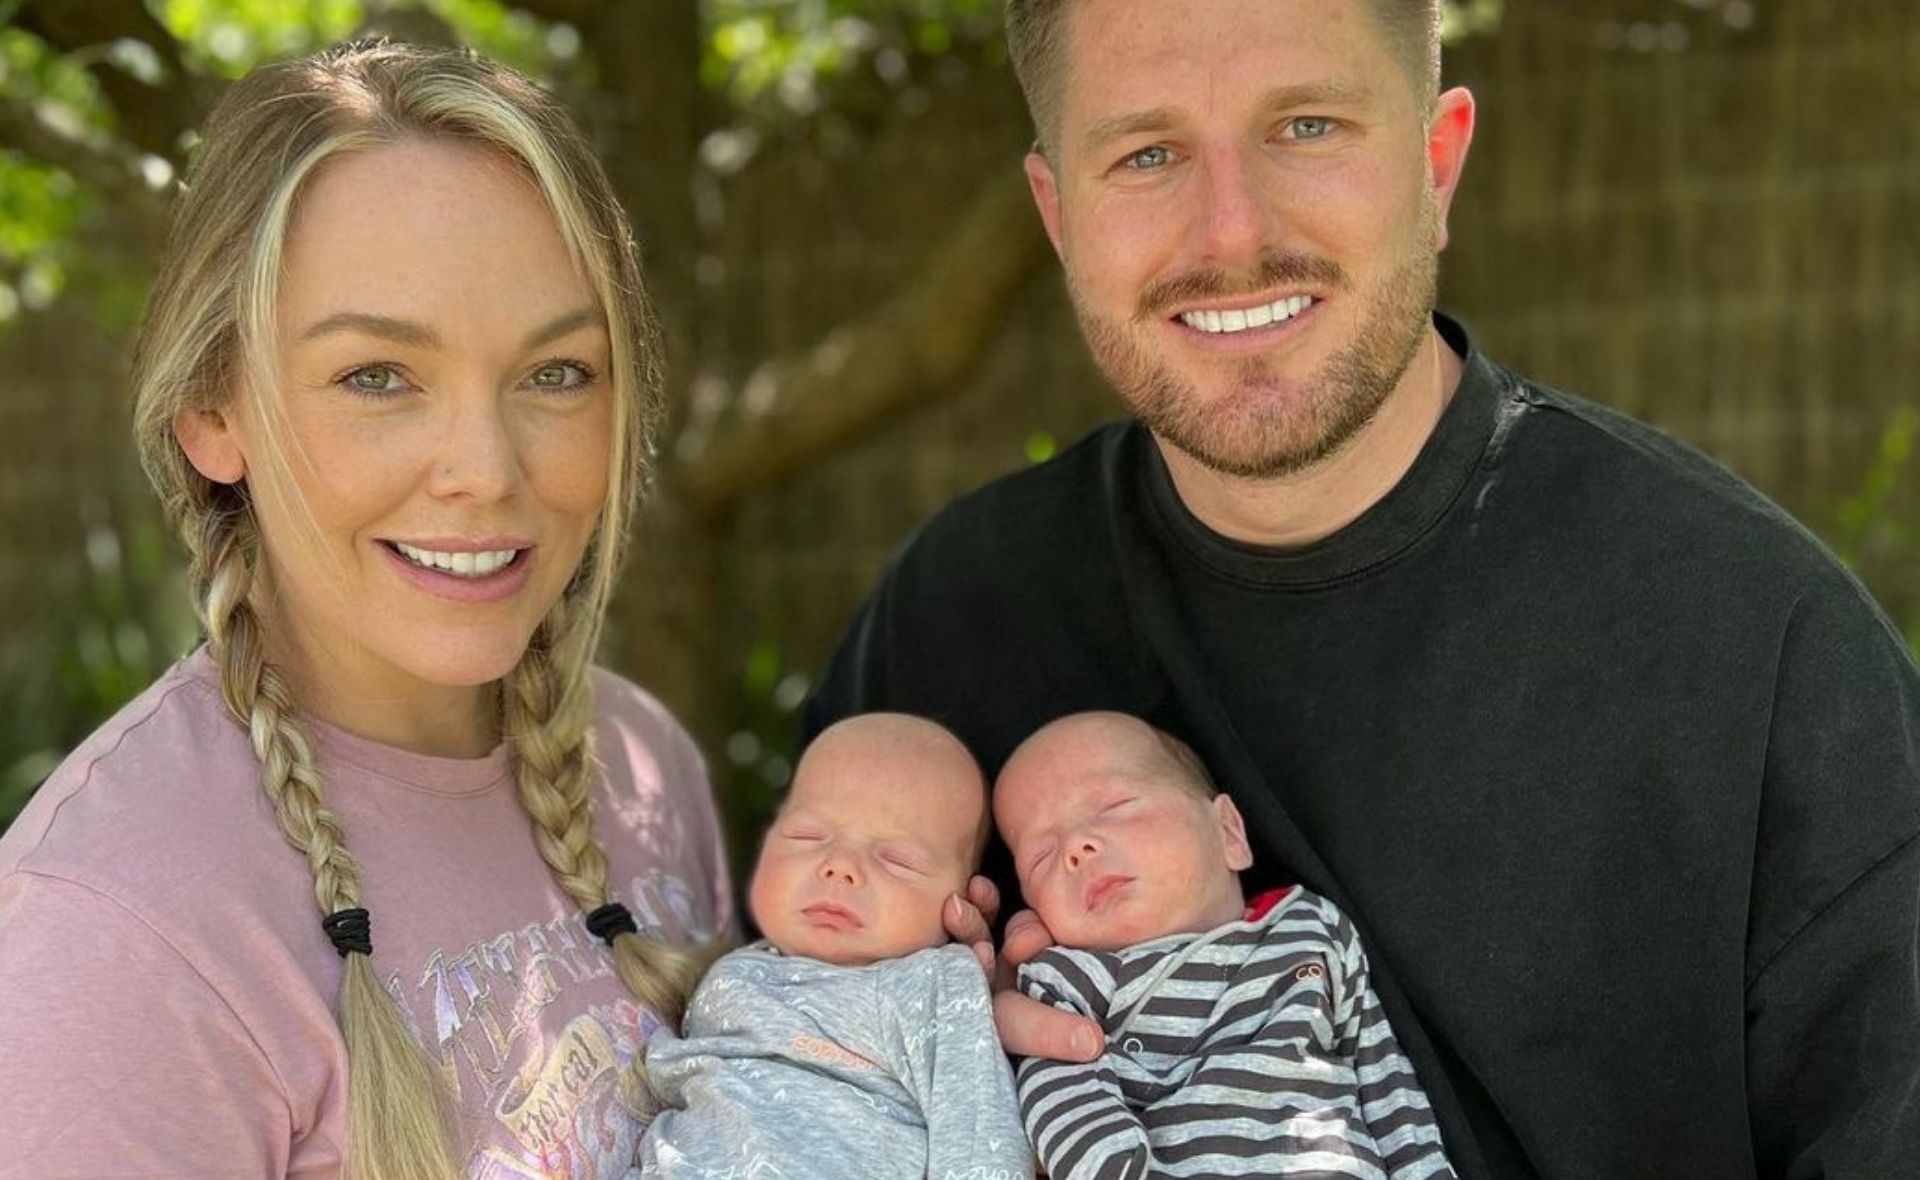 Married At First Sight’s Melissa Rawson reveals she is “struggling” with the realities of parenting newborns